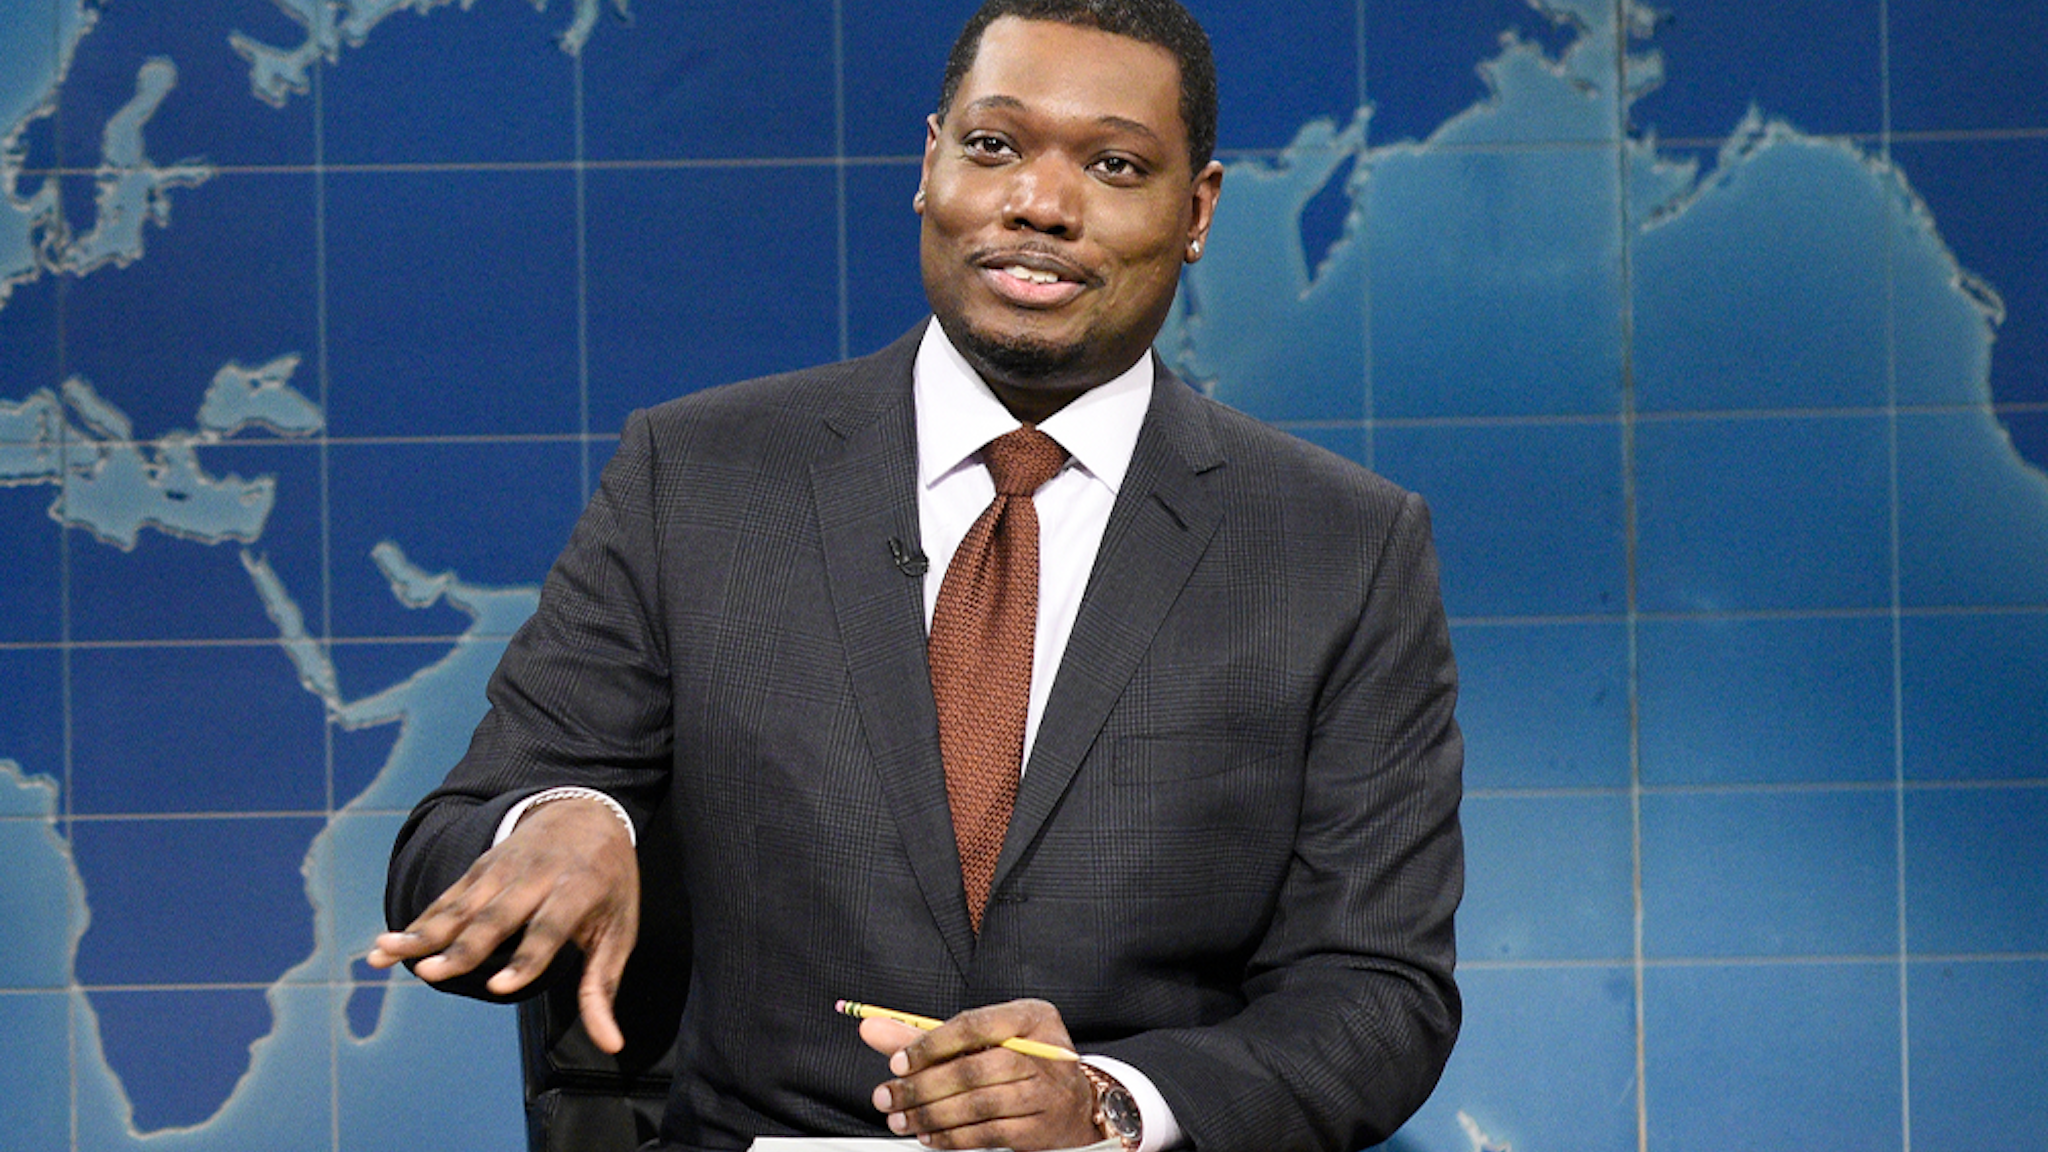 SATURDAY NIGHT LIVE -- "John Krasinski" Episode 1795 -- Pictured: (l-r) Anchor Colin Jost and anchor Michael Che during Weekend Update on Saturday, January 30, 2021